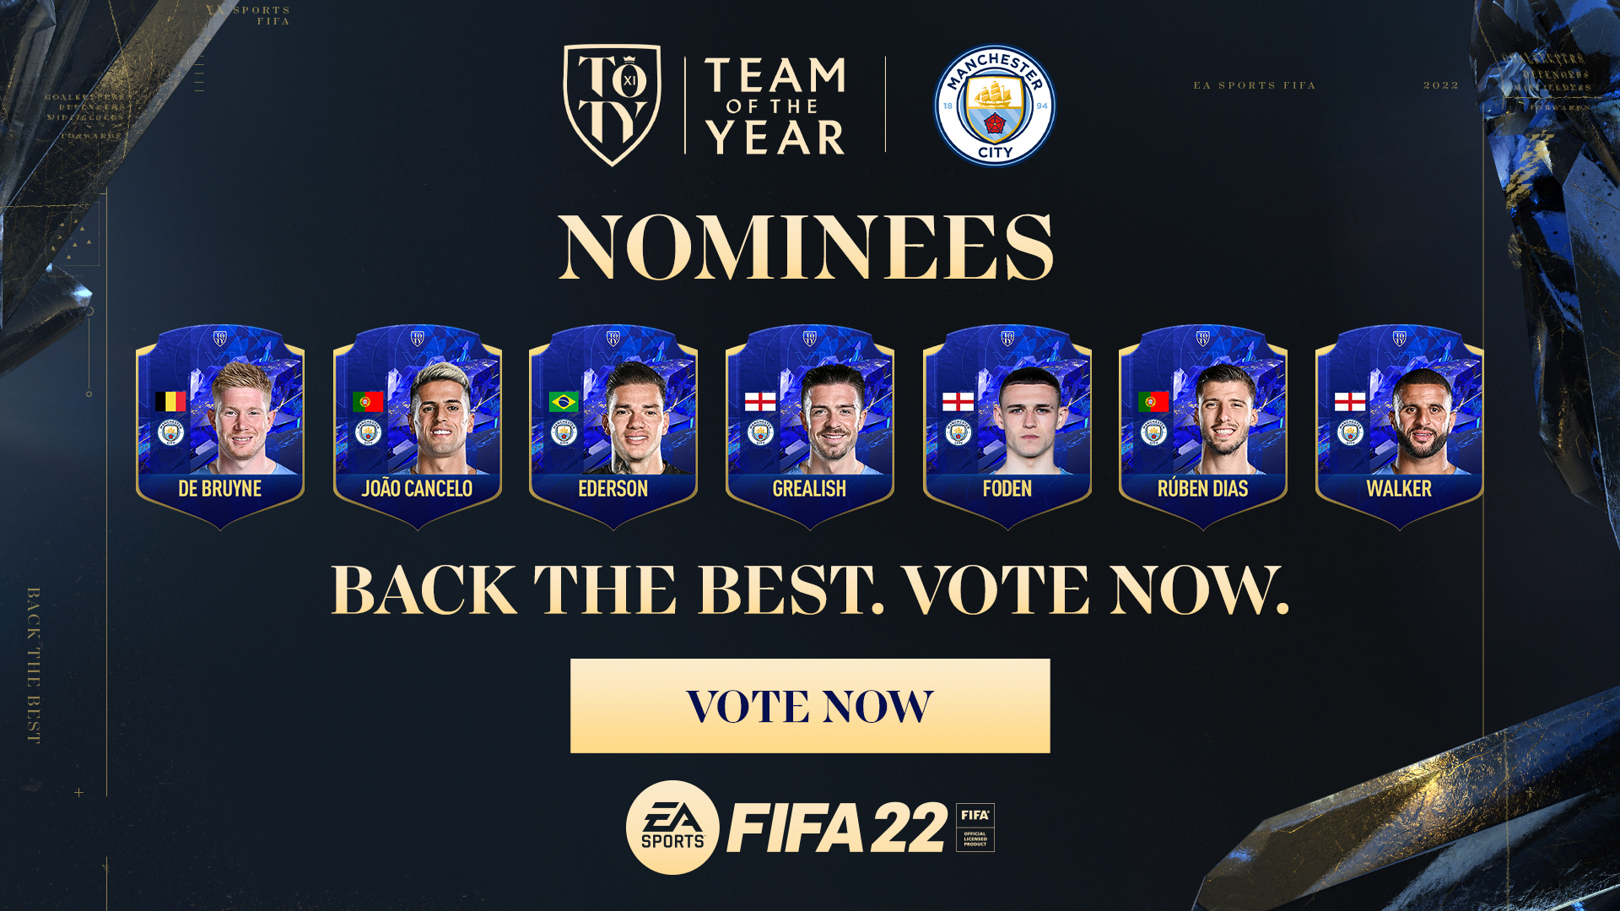 Seven City players shortlisted for FIFA 22 team of the year